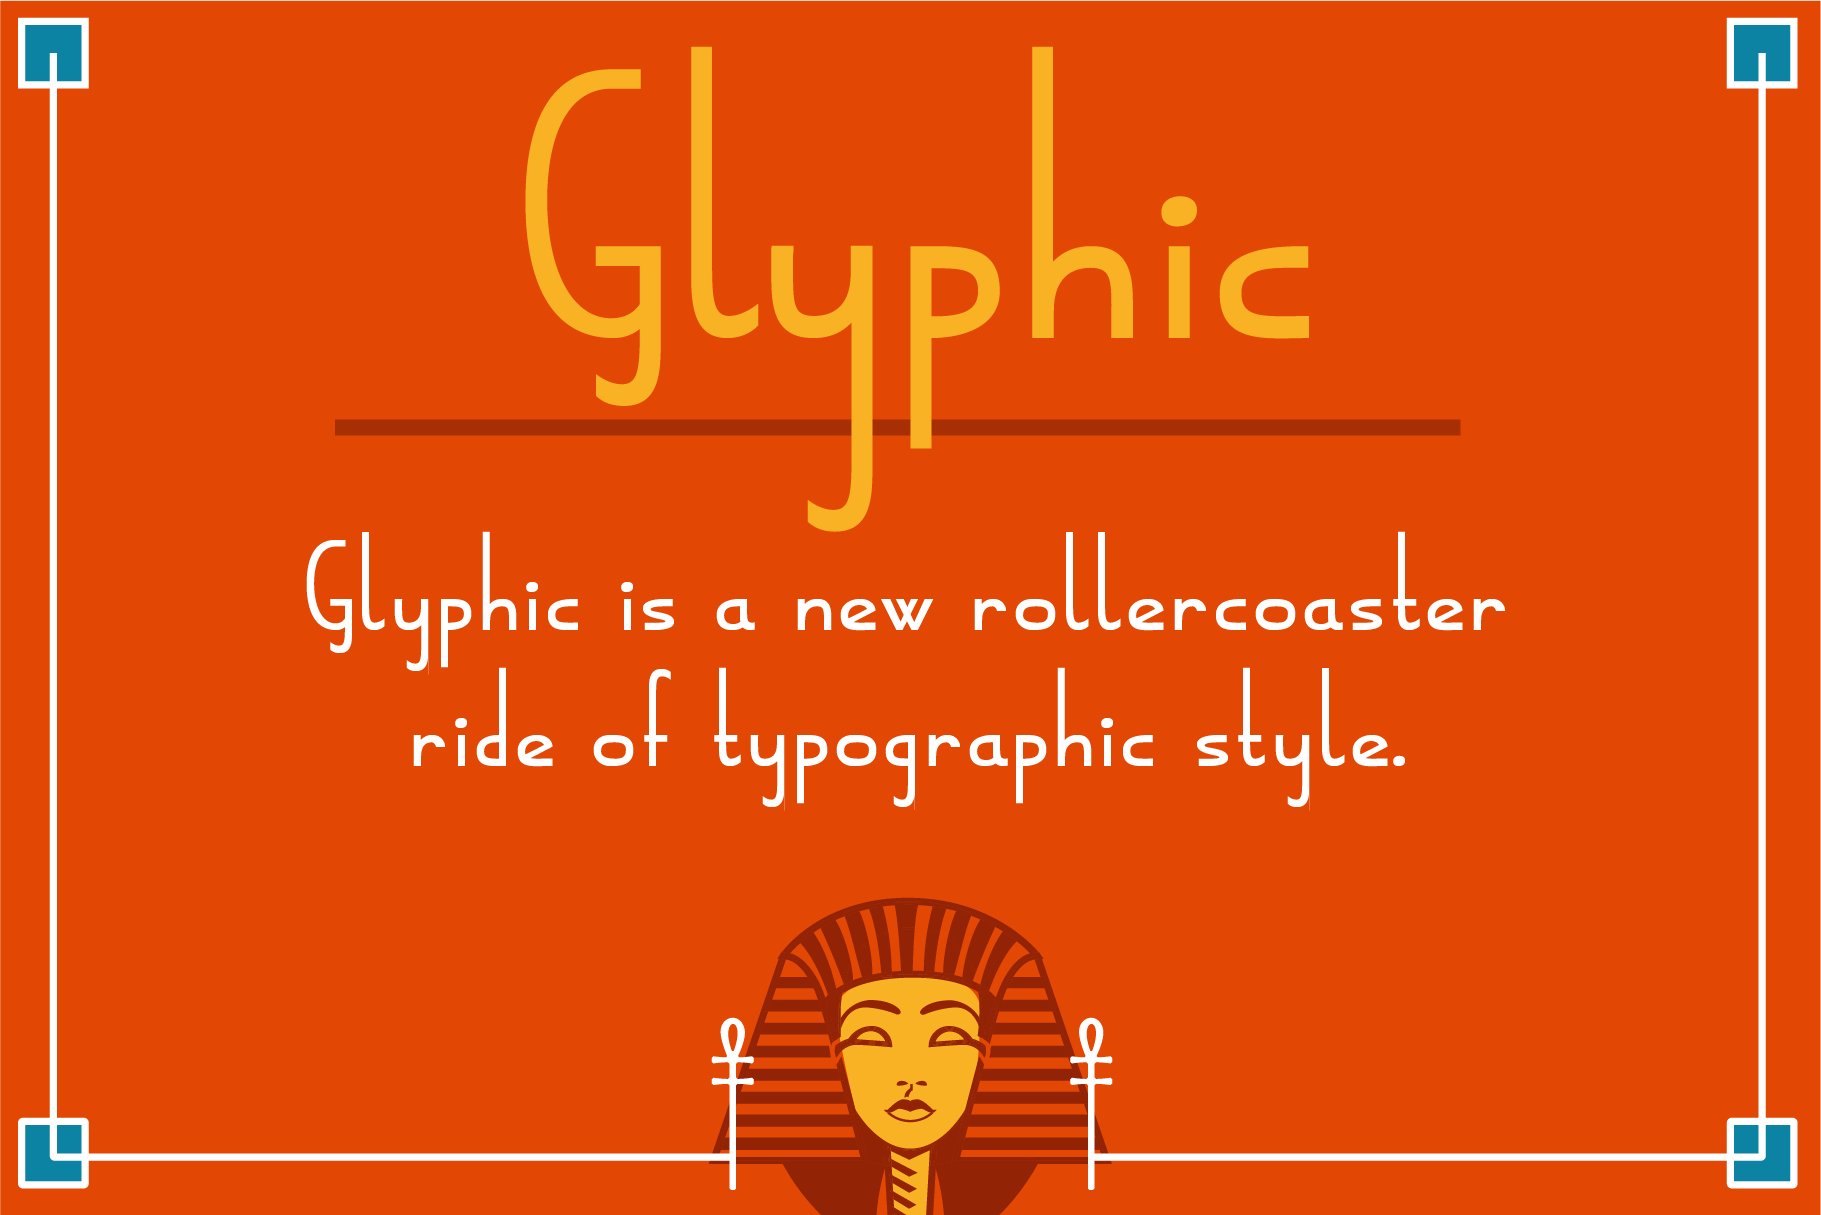 Glyphic cover image.